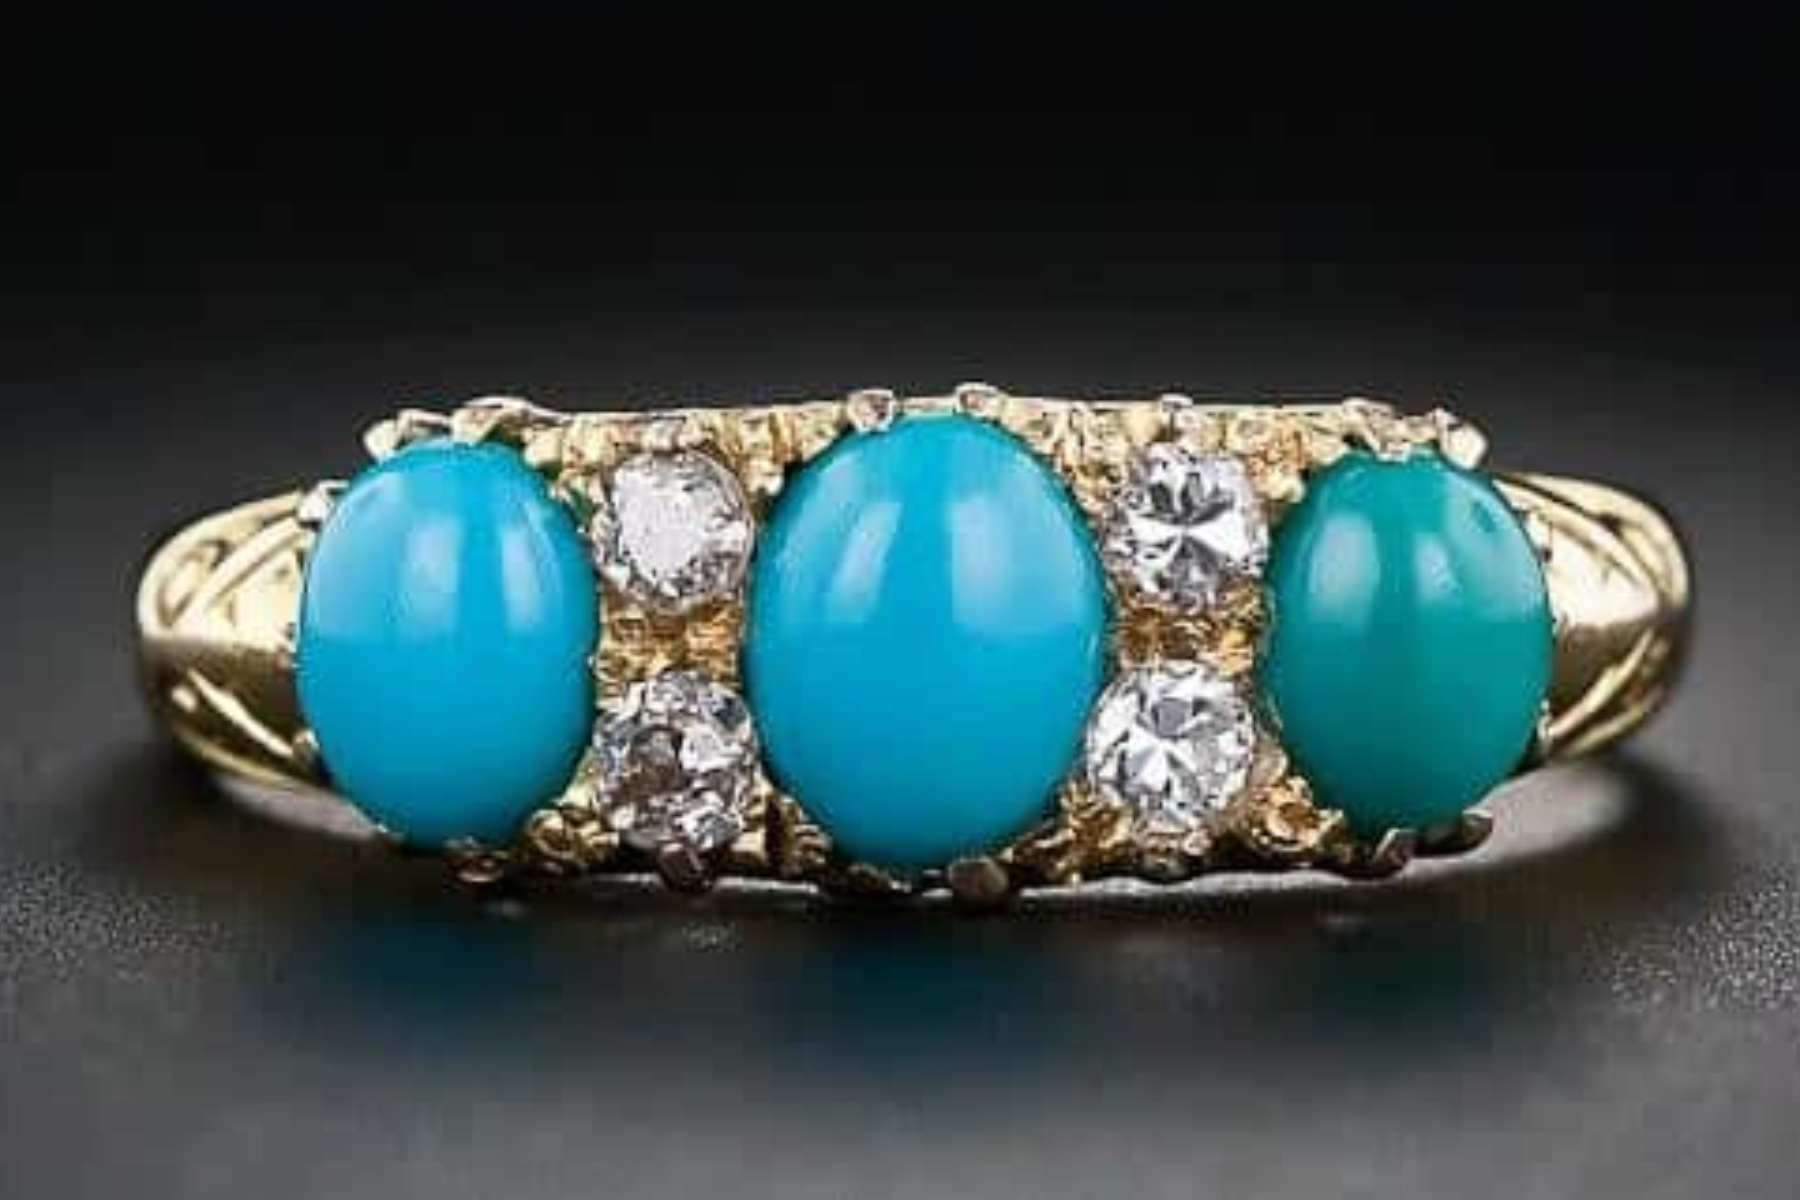 A bracelet featuring three polished turquoise stones